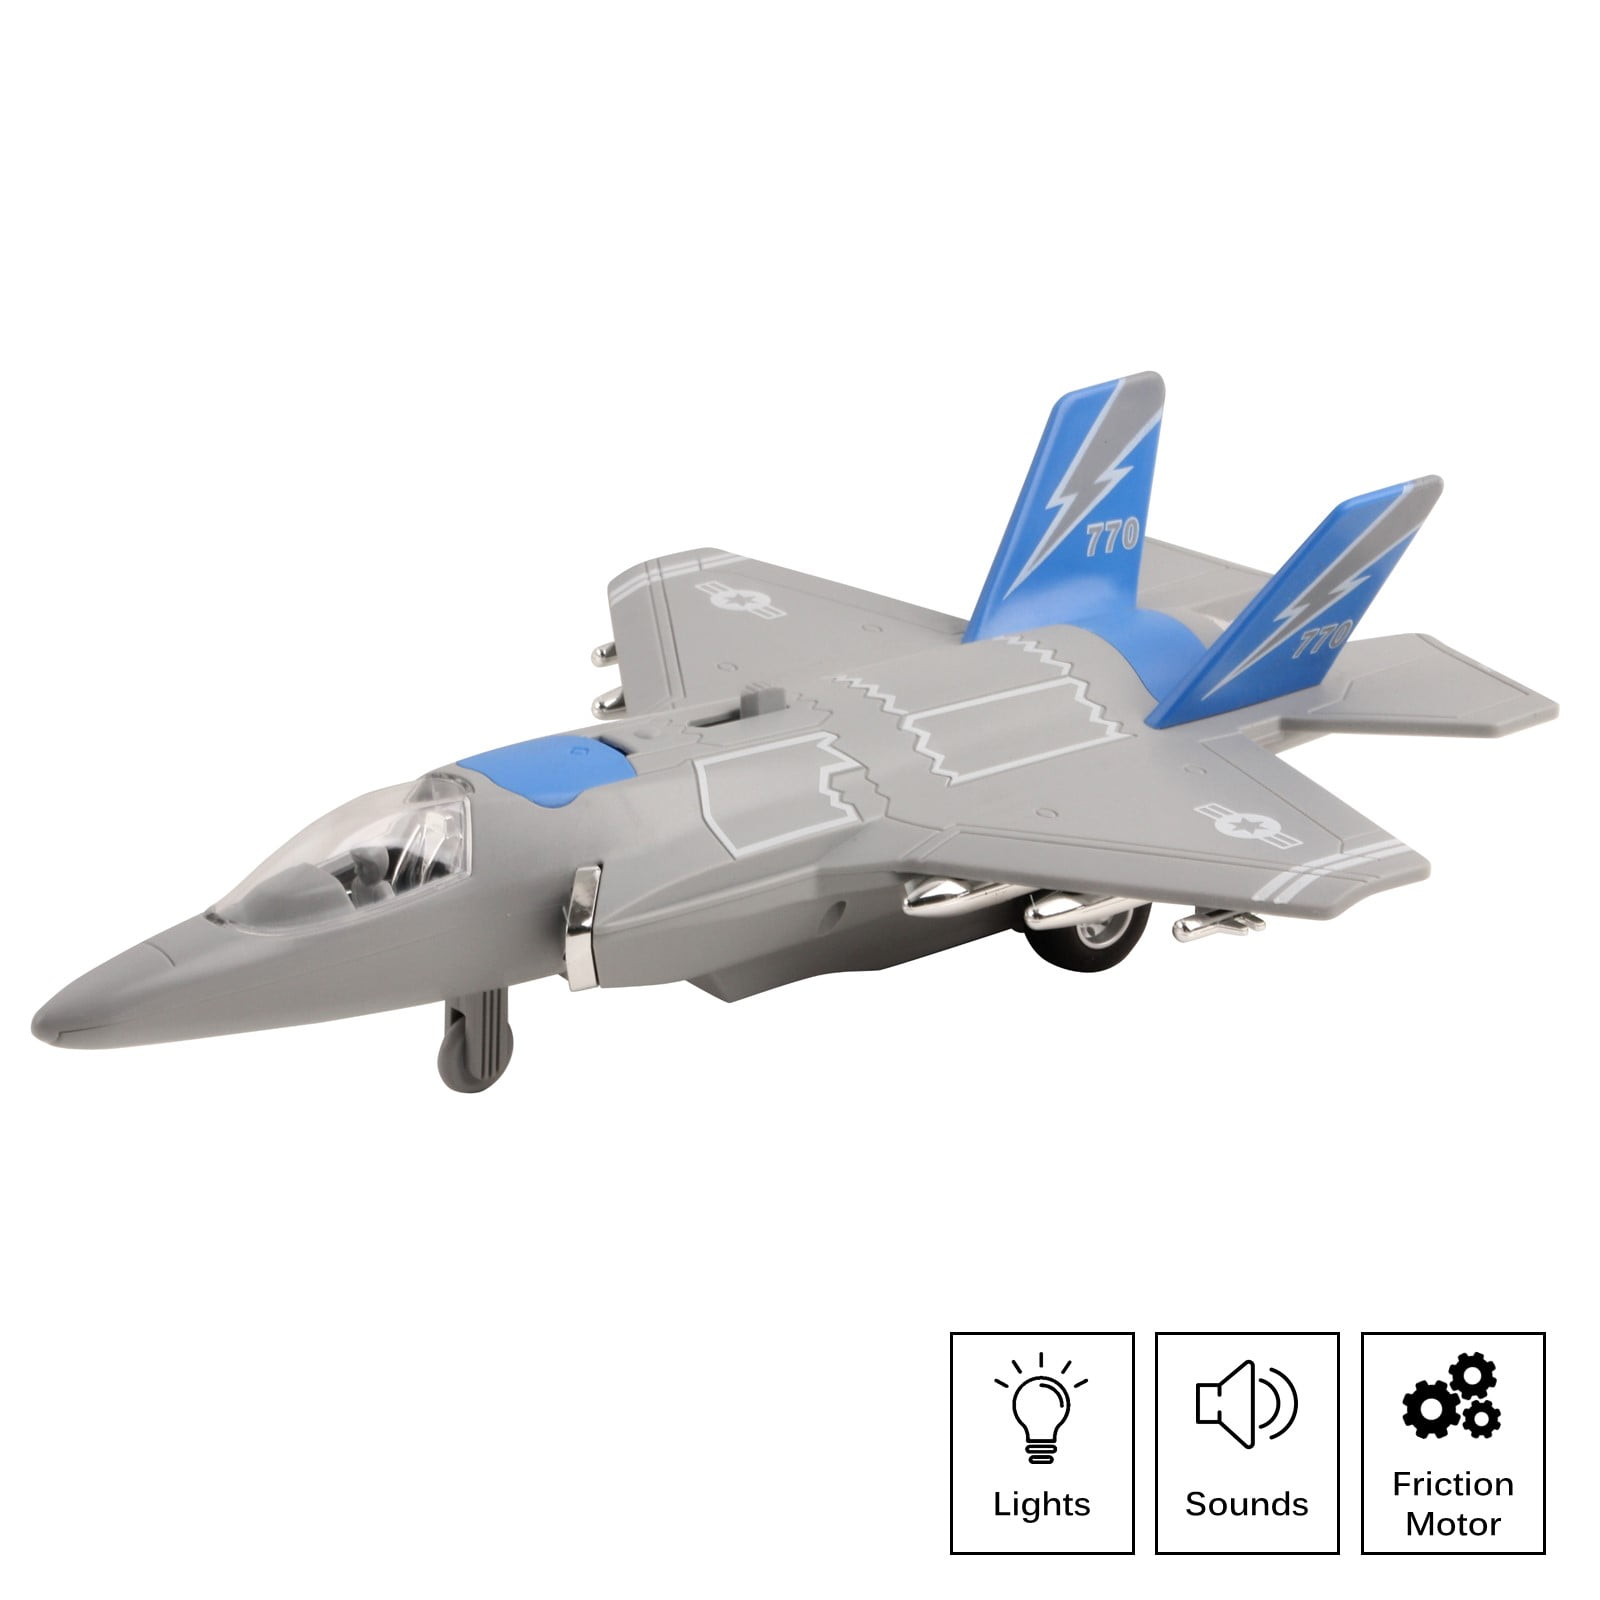 9.5" X-Planes US Navy F-18 Hornet Blue Angel Jet Diecast Toy Authentic Set of 6 